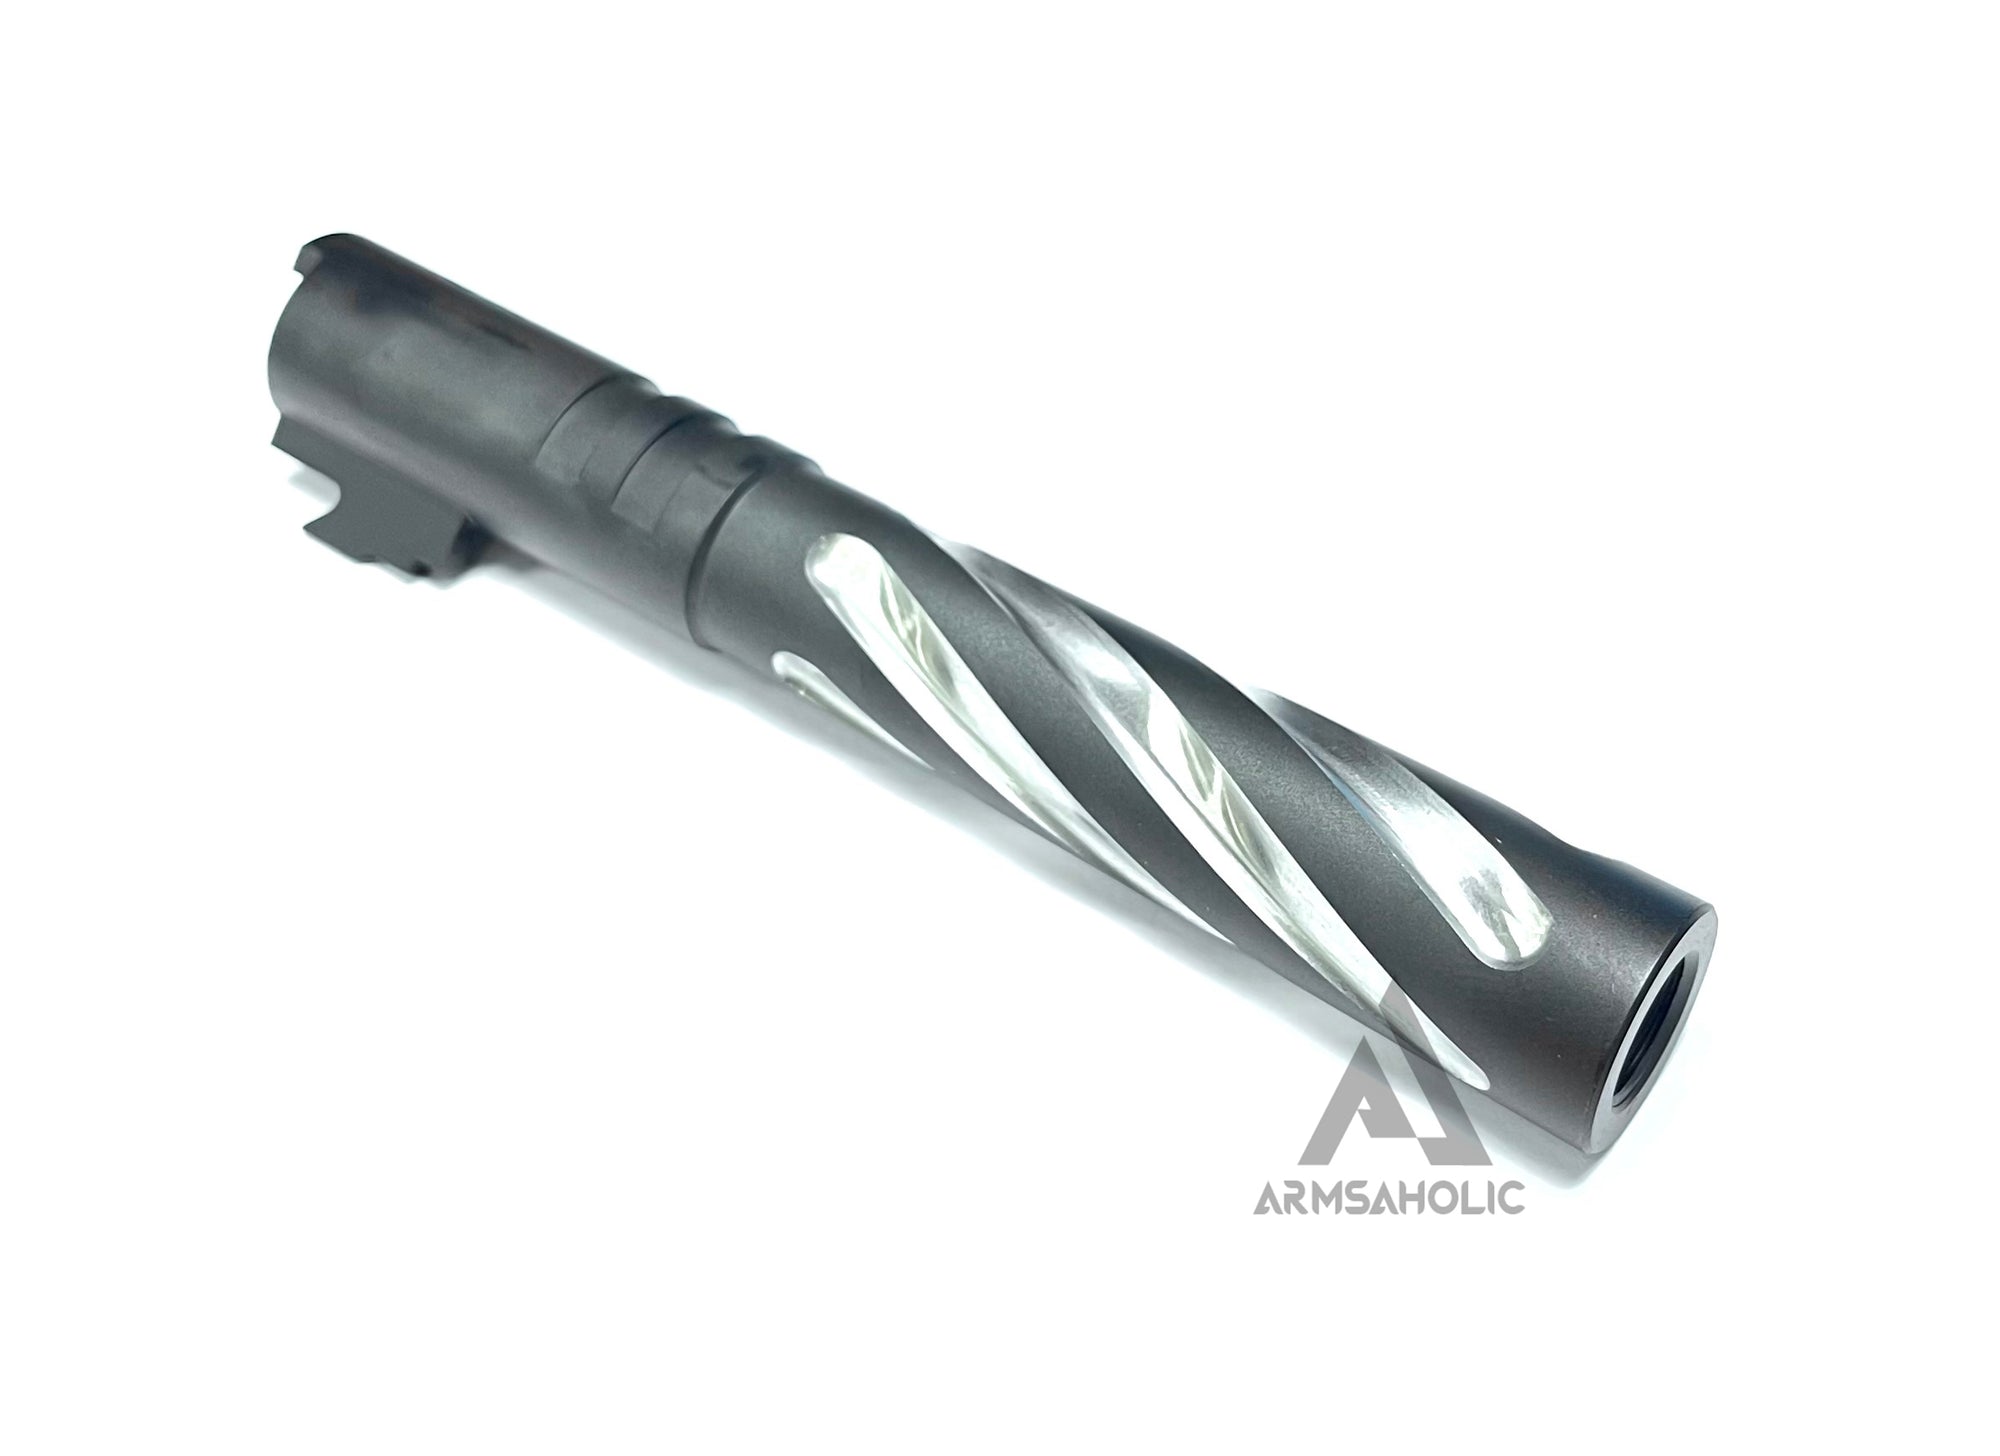 5KU Tornado 5 inch Stainless Outer Barrel with Threads for Hi-CAPA 5.1 Black